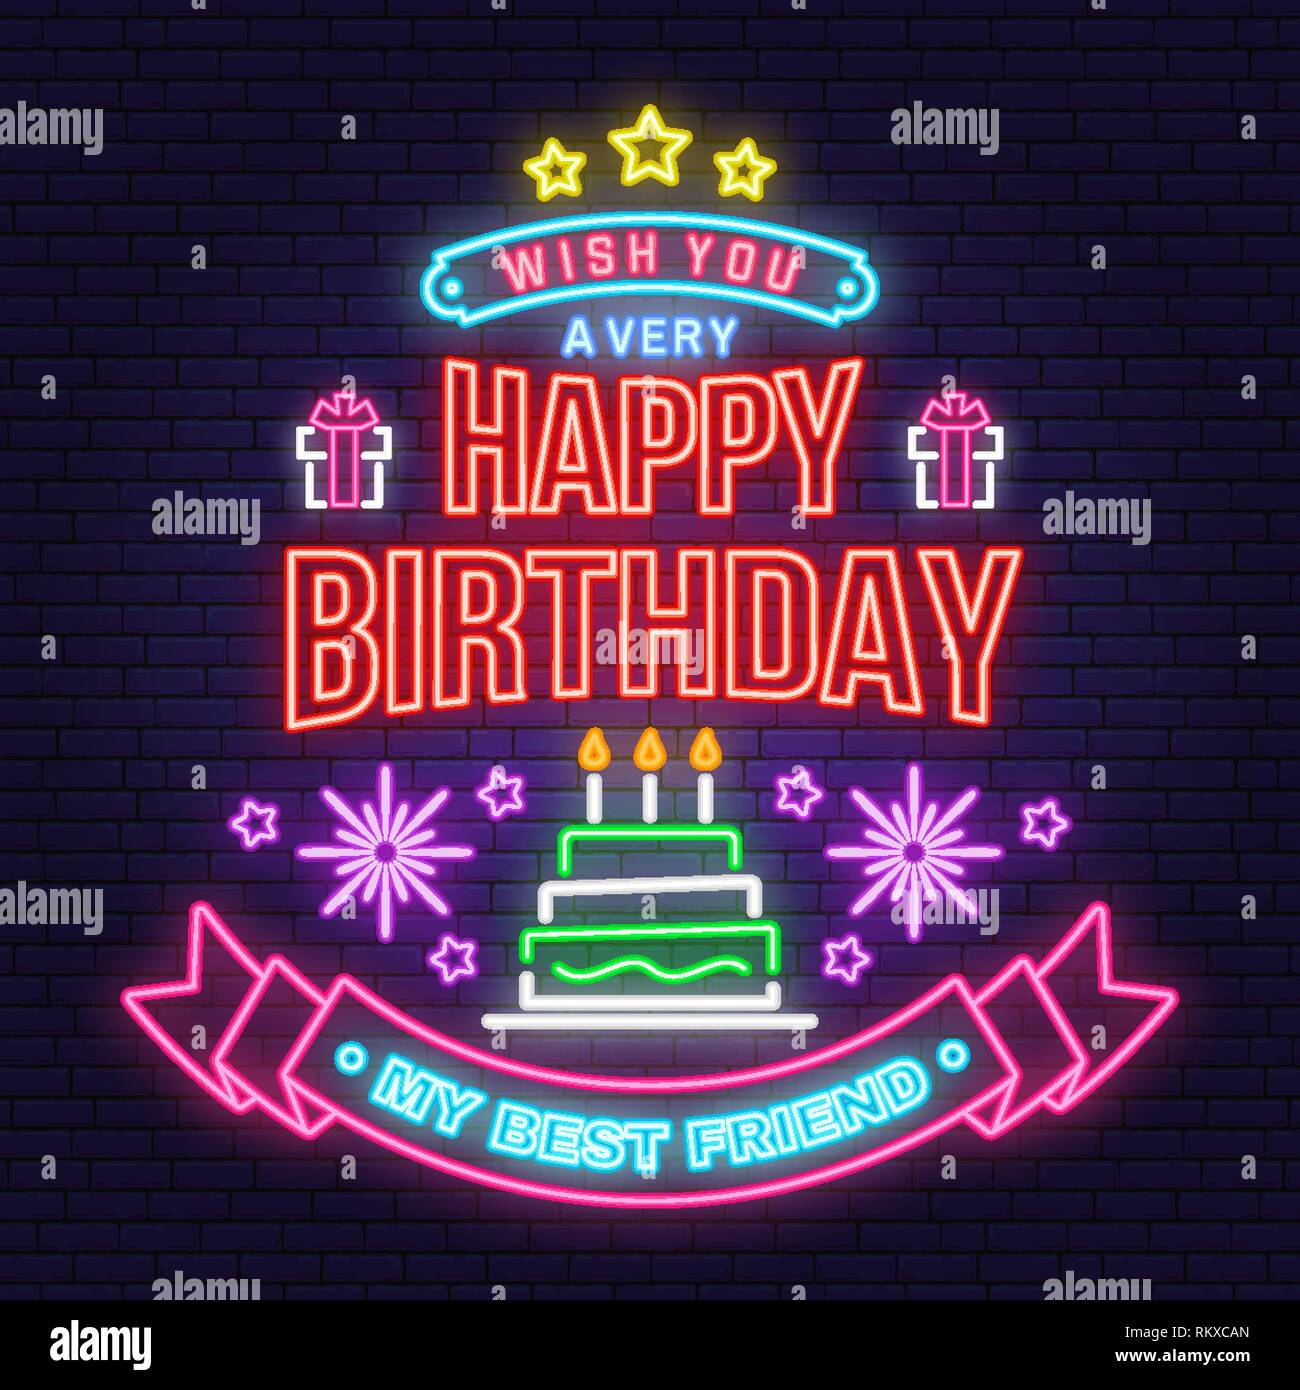 Wish You A Very Happy Birthday My Best Friend Neon Sign Badge